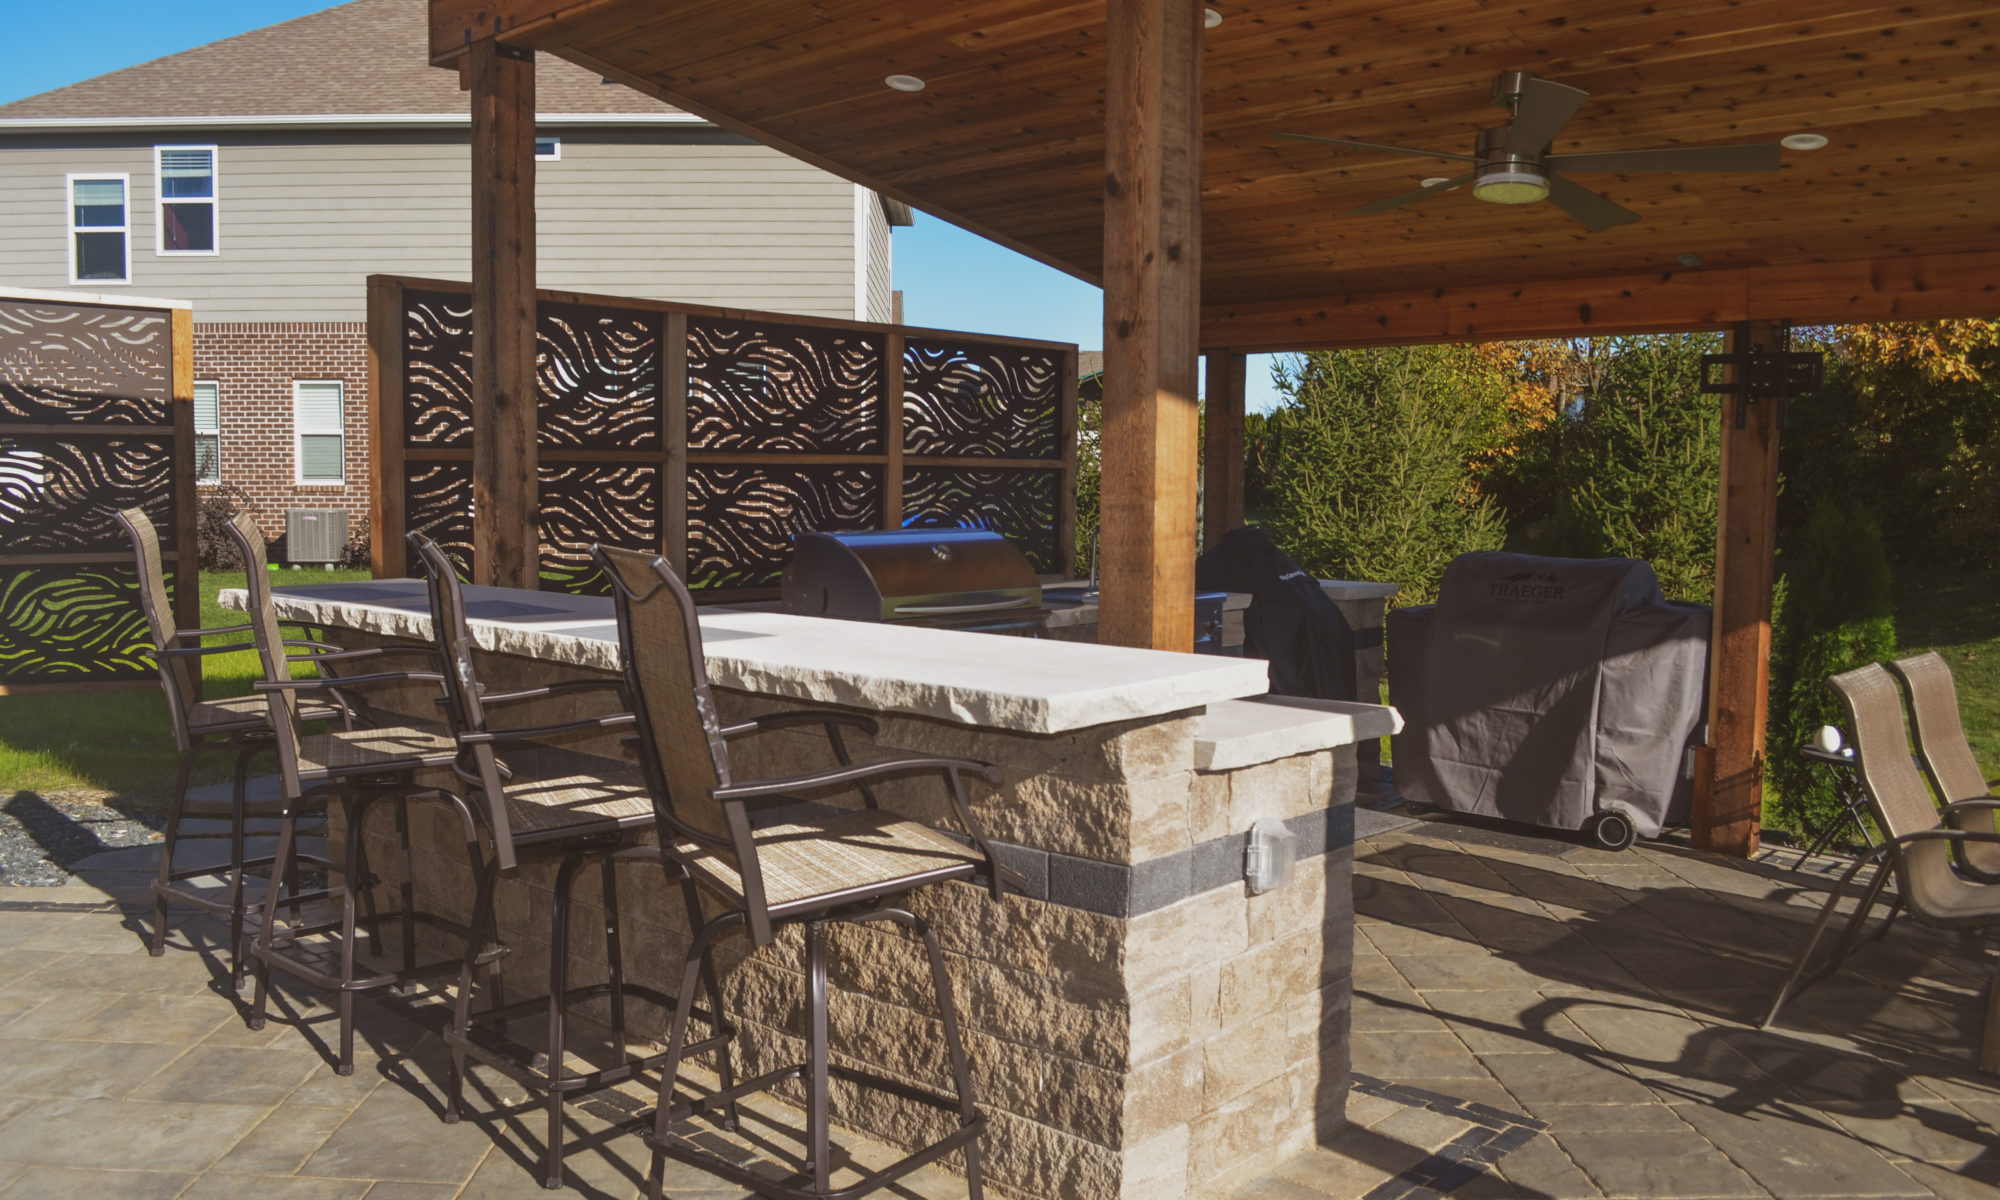 Precision Outdoors Emerald Ridge Hideaway shed roof structure paver patio outdoor kitchen barter seating privacy screens walking stone indianapolis indiana privacy screens